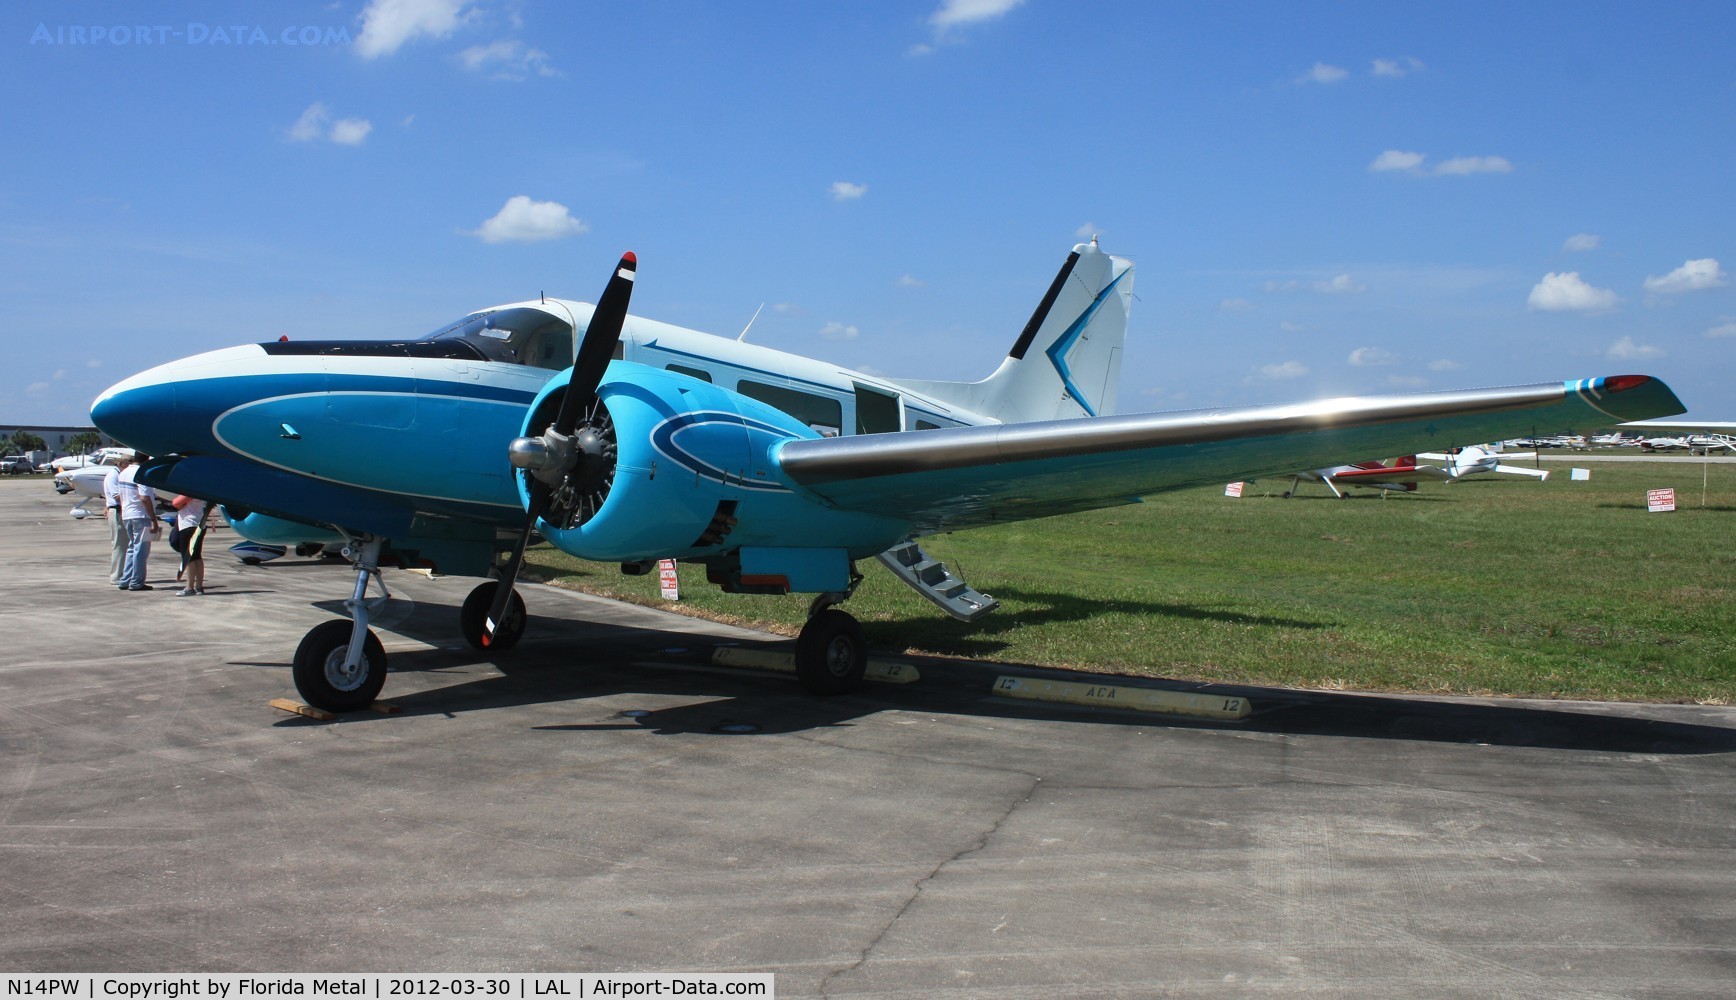 N14PW, 1951 Beech C-45H Expeditor C/N AF-314, Single tail Beech 18/C-45